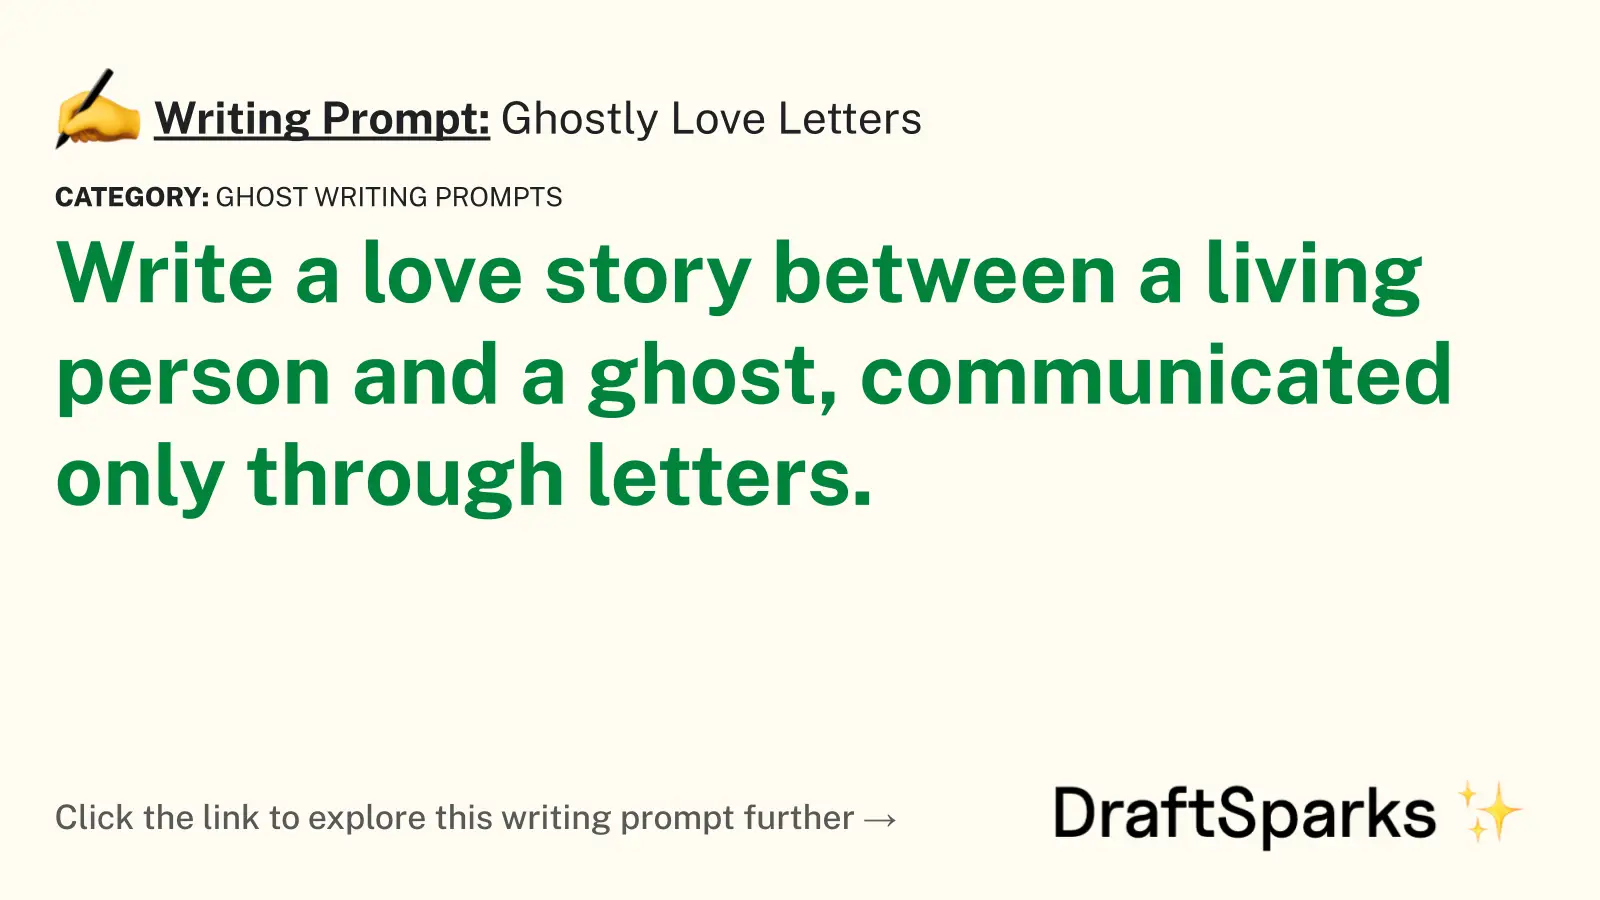 Ghostly Love Letters